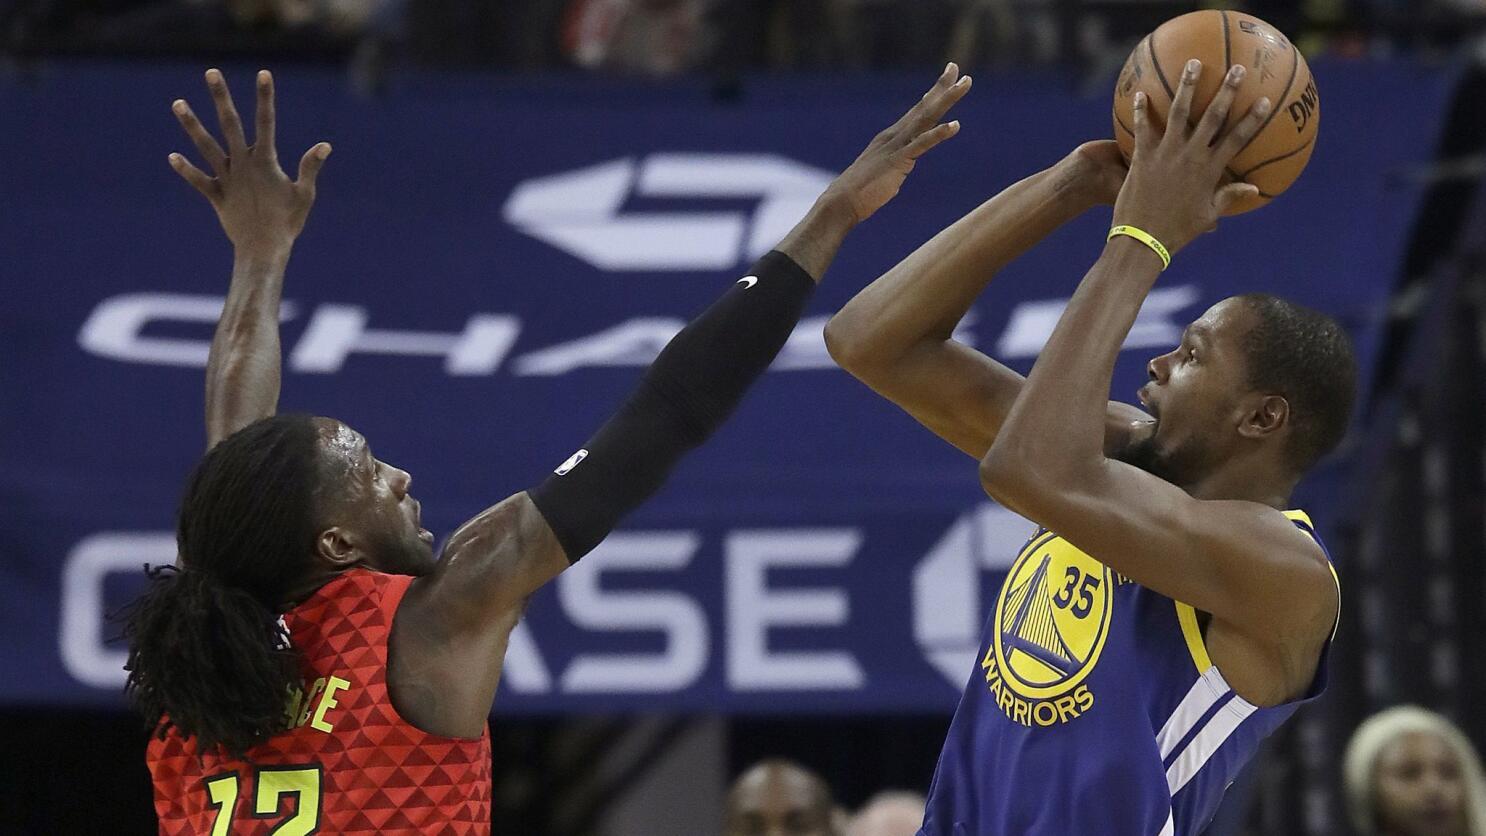 Warriors' Draymond Green suspended for confrontation with Kevin Durant